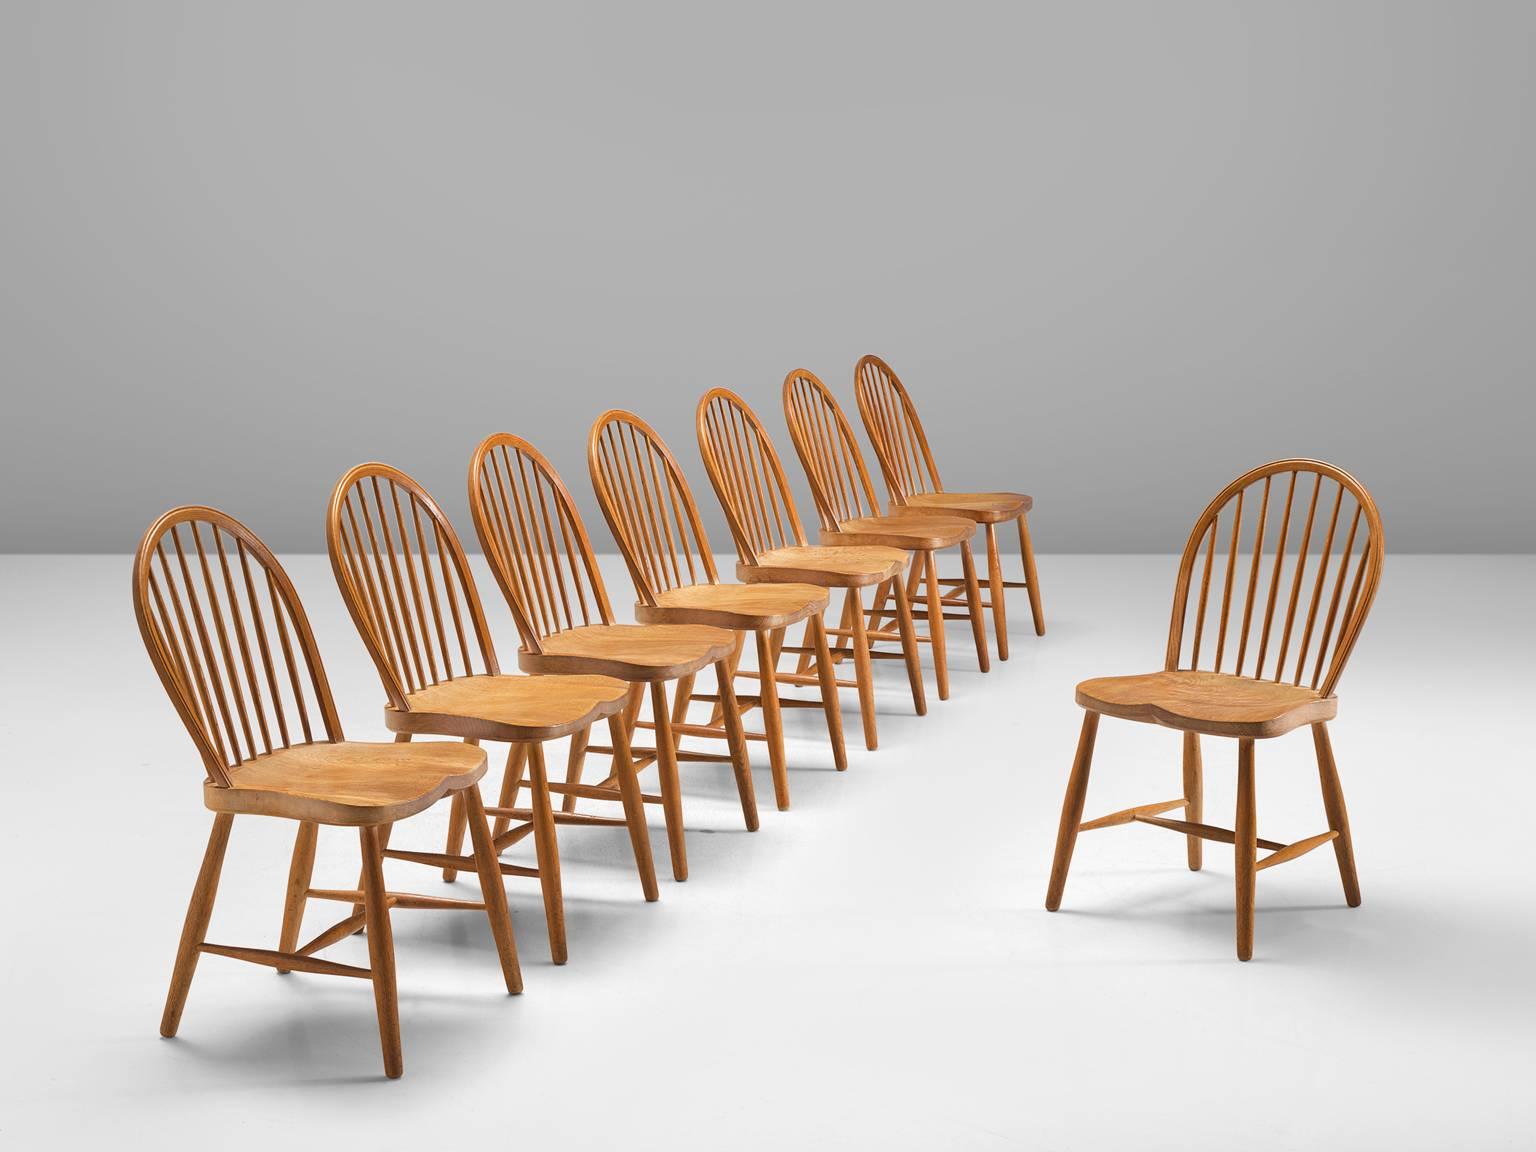 Frits Henningsen, set of eight chairs, oak, Denmark, 1940s

These modern Windsor type chairs were designed and made by Frits Henningsen. They are part of the midcentury design collection. The back provides an open look thanks to the spindles. The